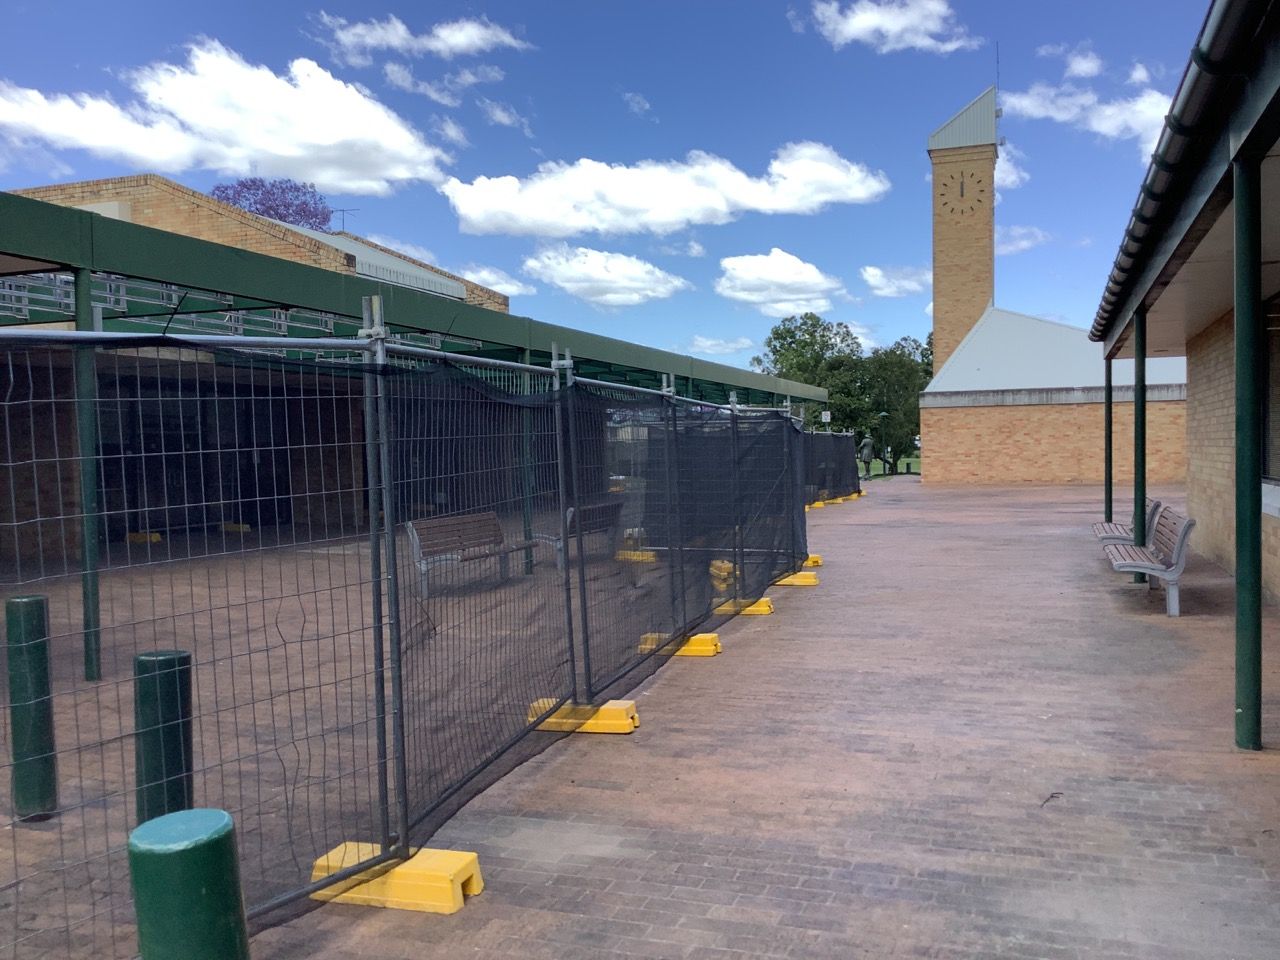 Parking Fence — Roof Safety Systems in Sandgate, NSW